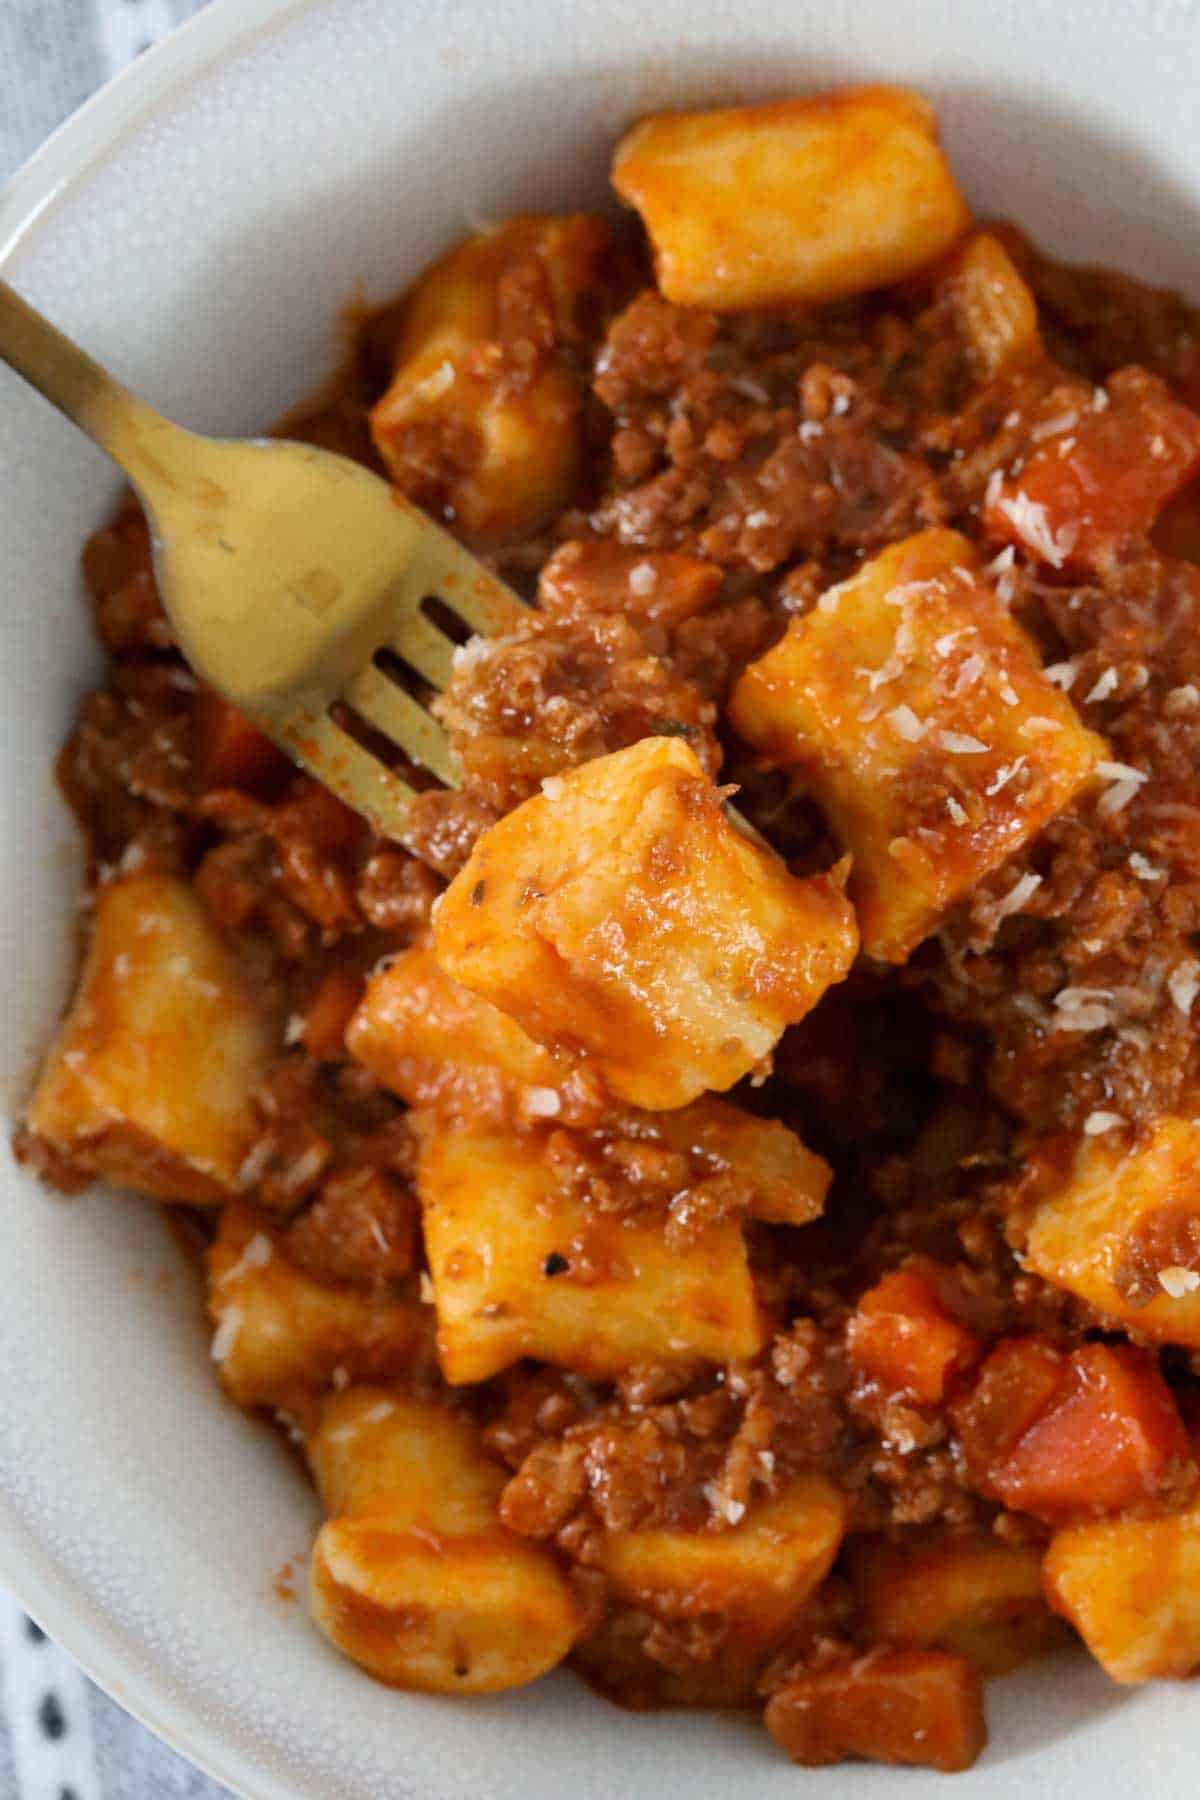 Gnocchi served with bolognese sauce being eaten with a fork.